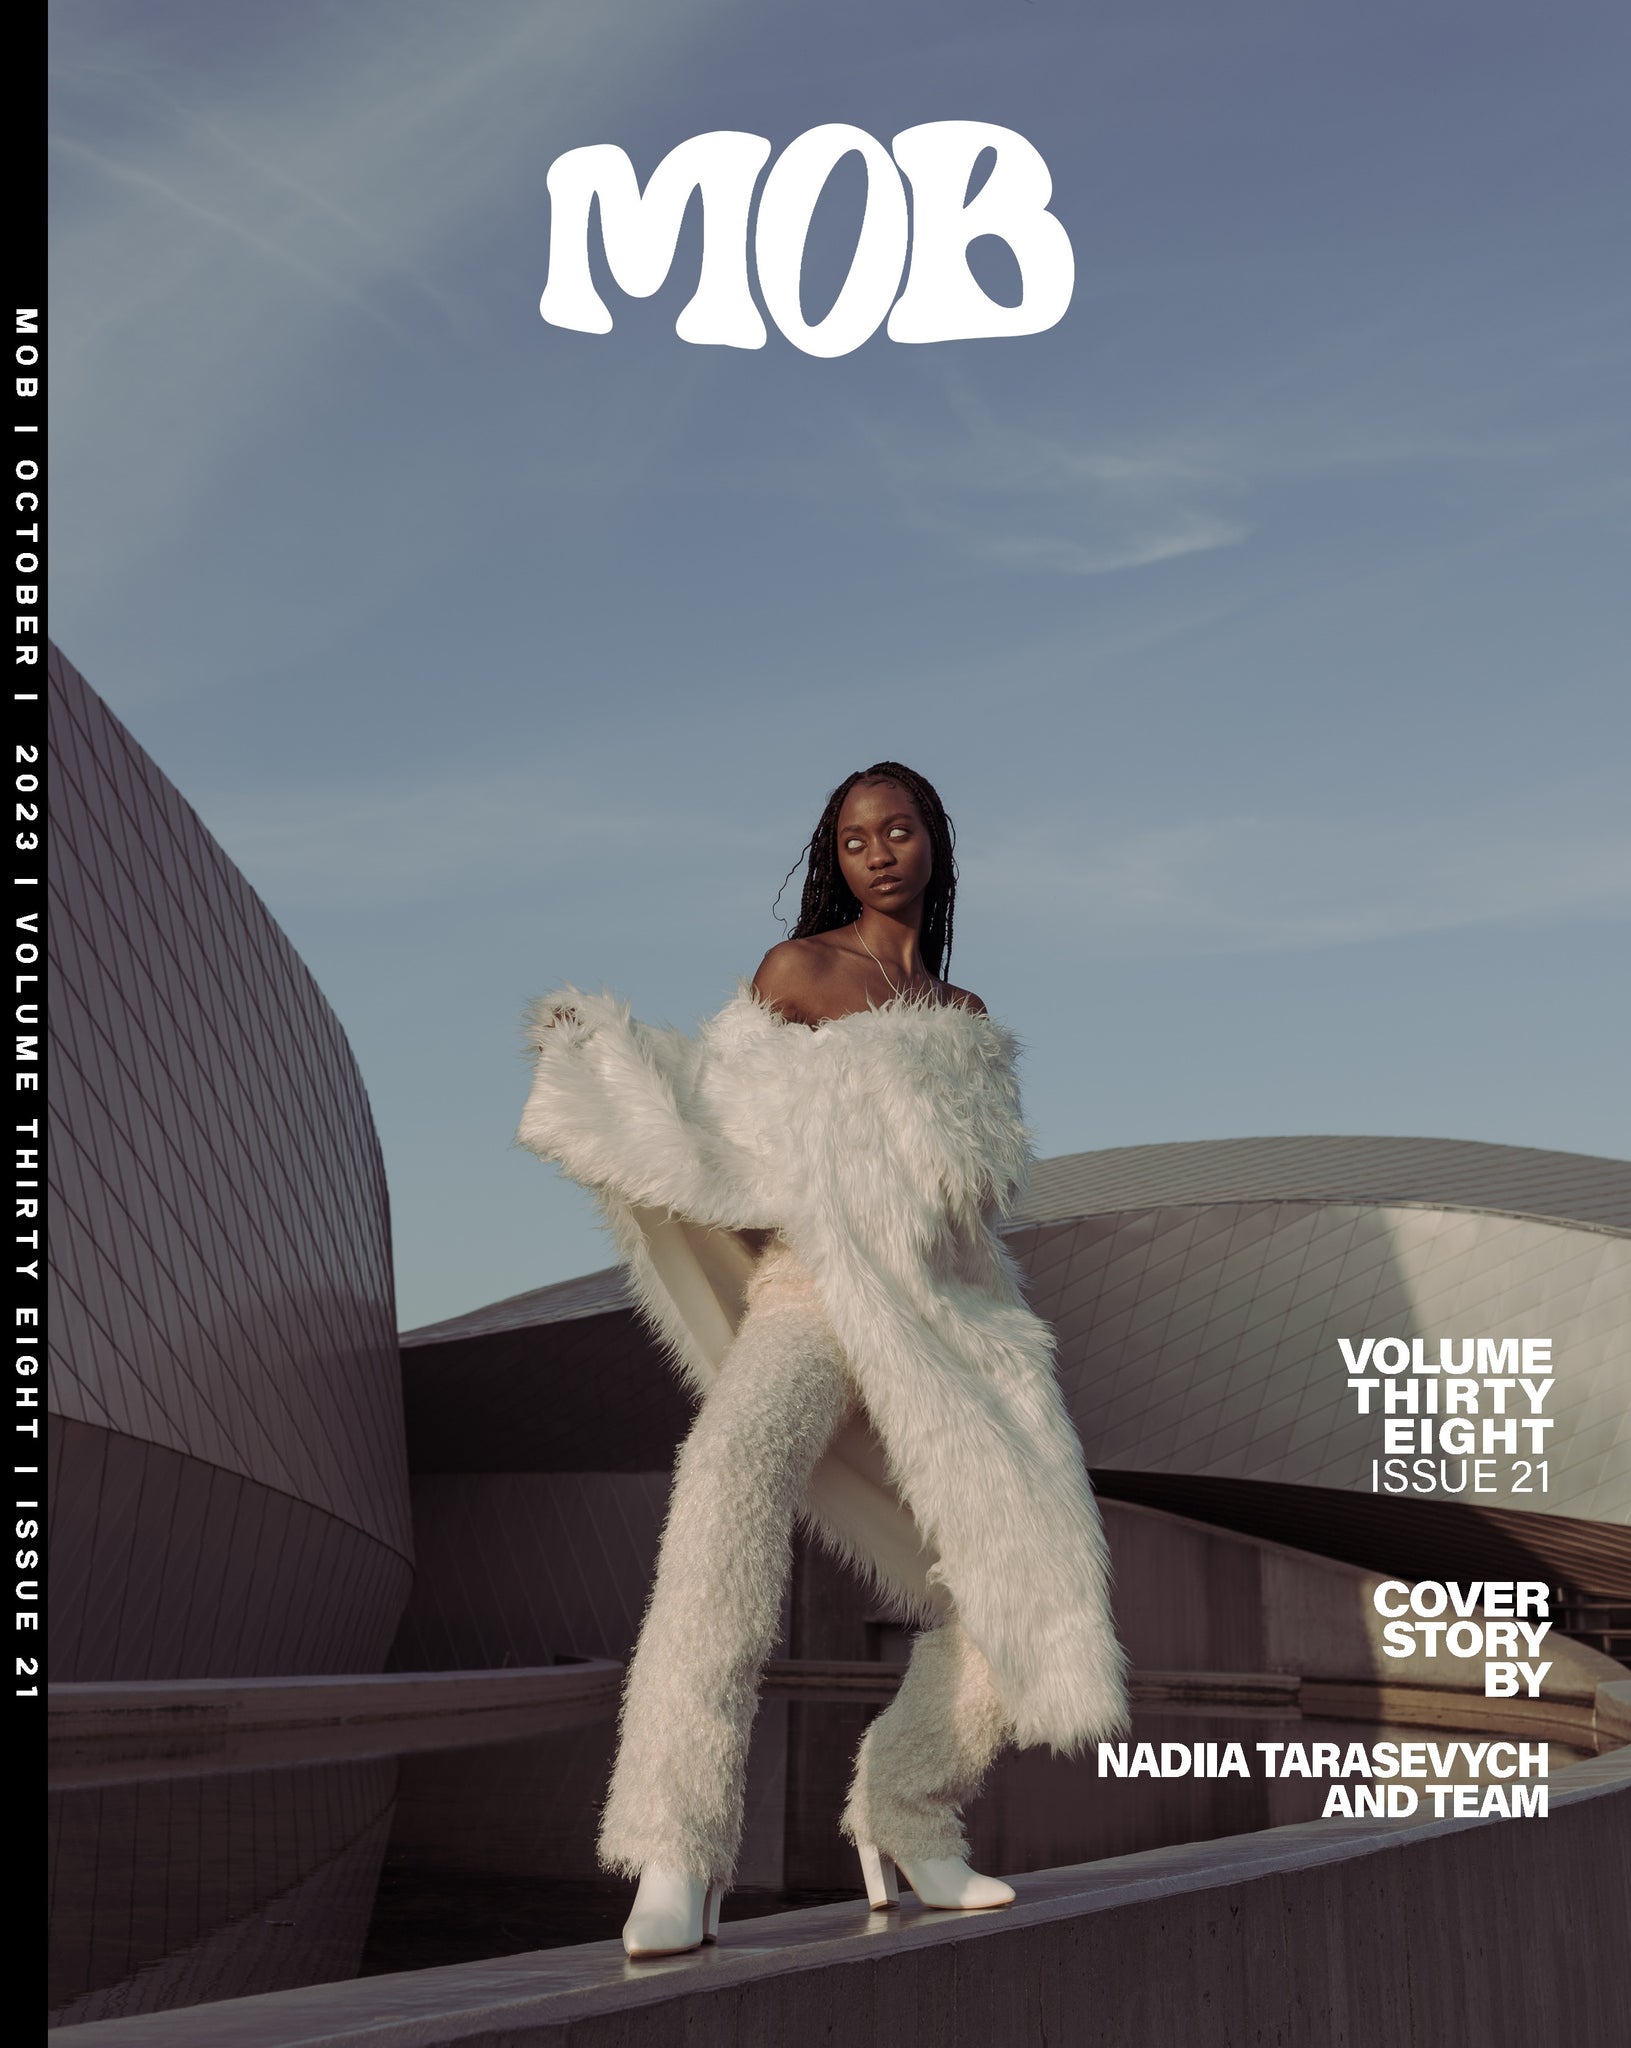 MOB JOURNAL | VOLUME THIRTY EIGHT | ISSUE #21